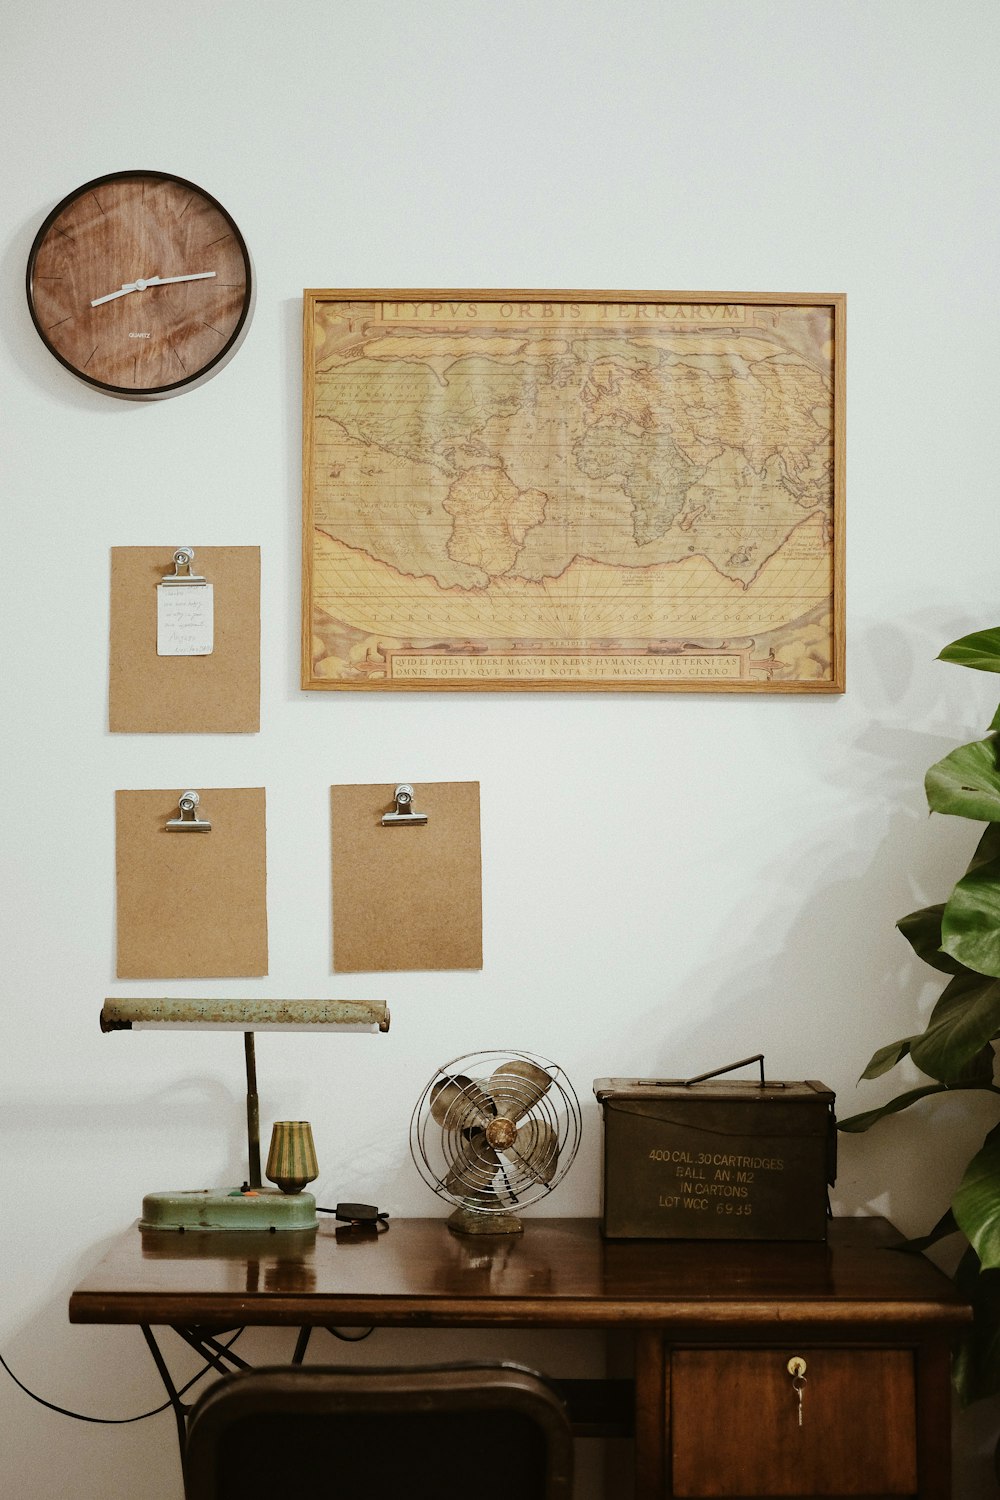 a wooden desk topped with a wooden clock next to a wall mounted map